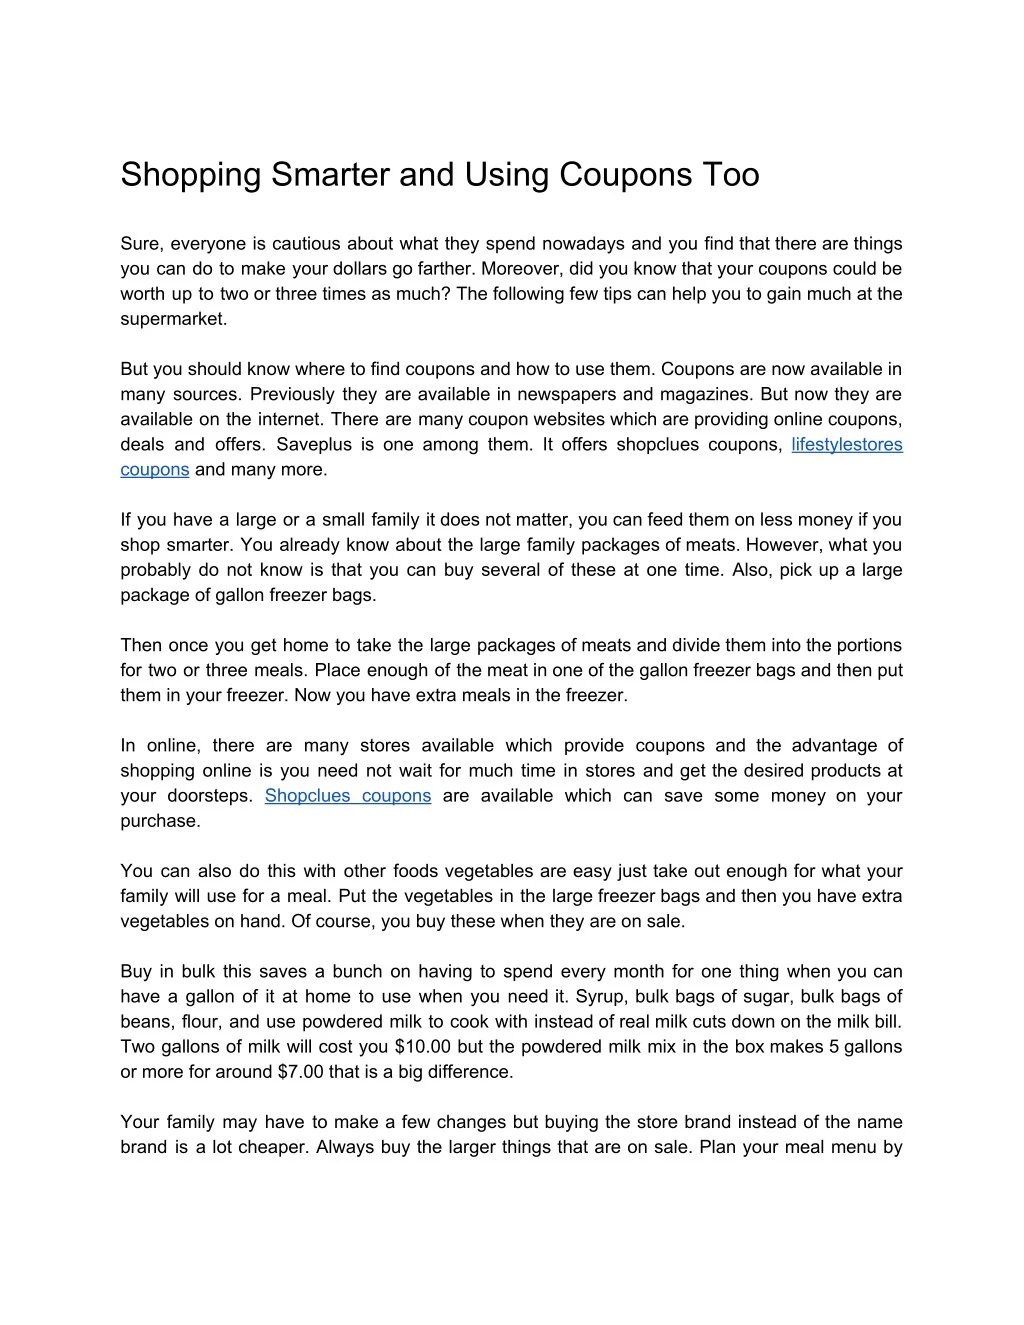 shopping smarter and using coupons too